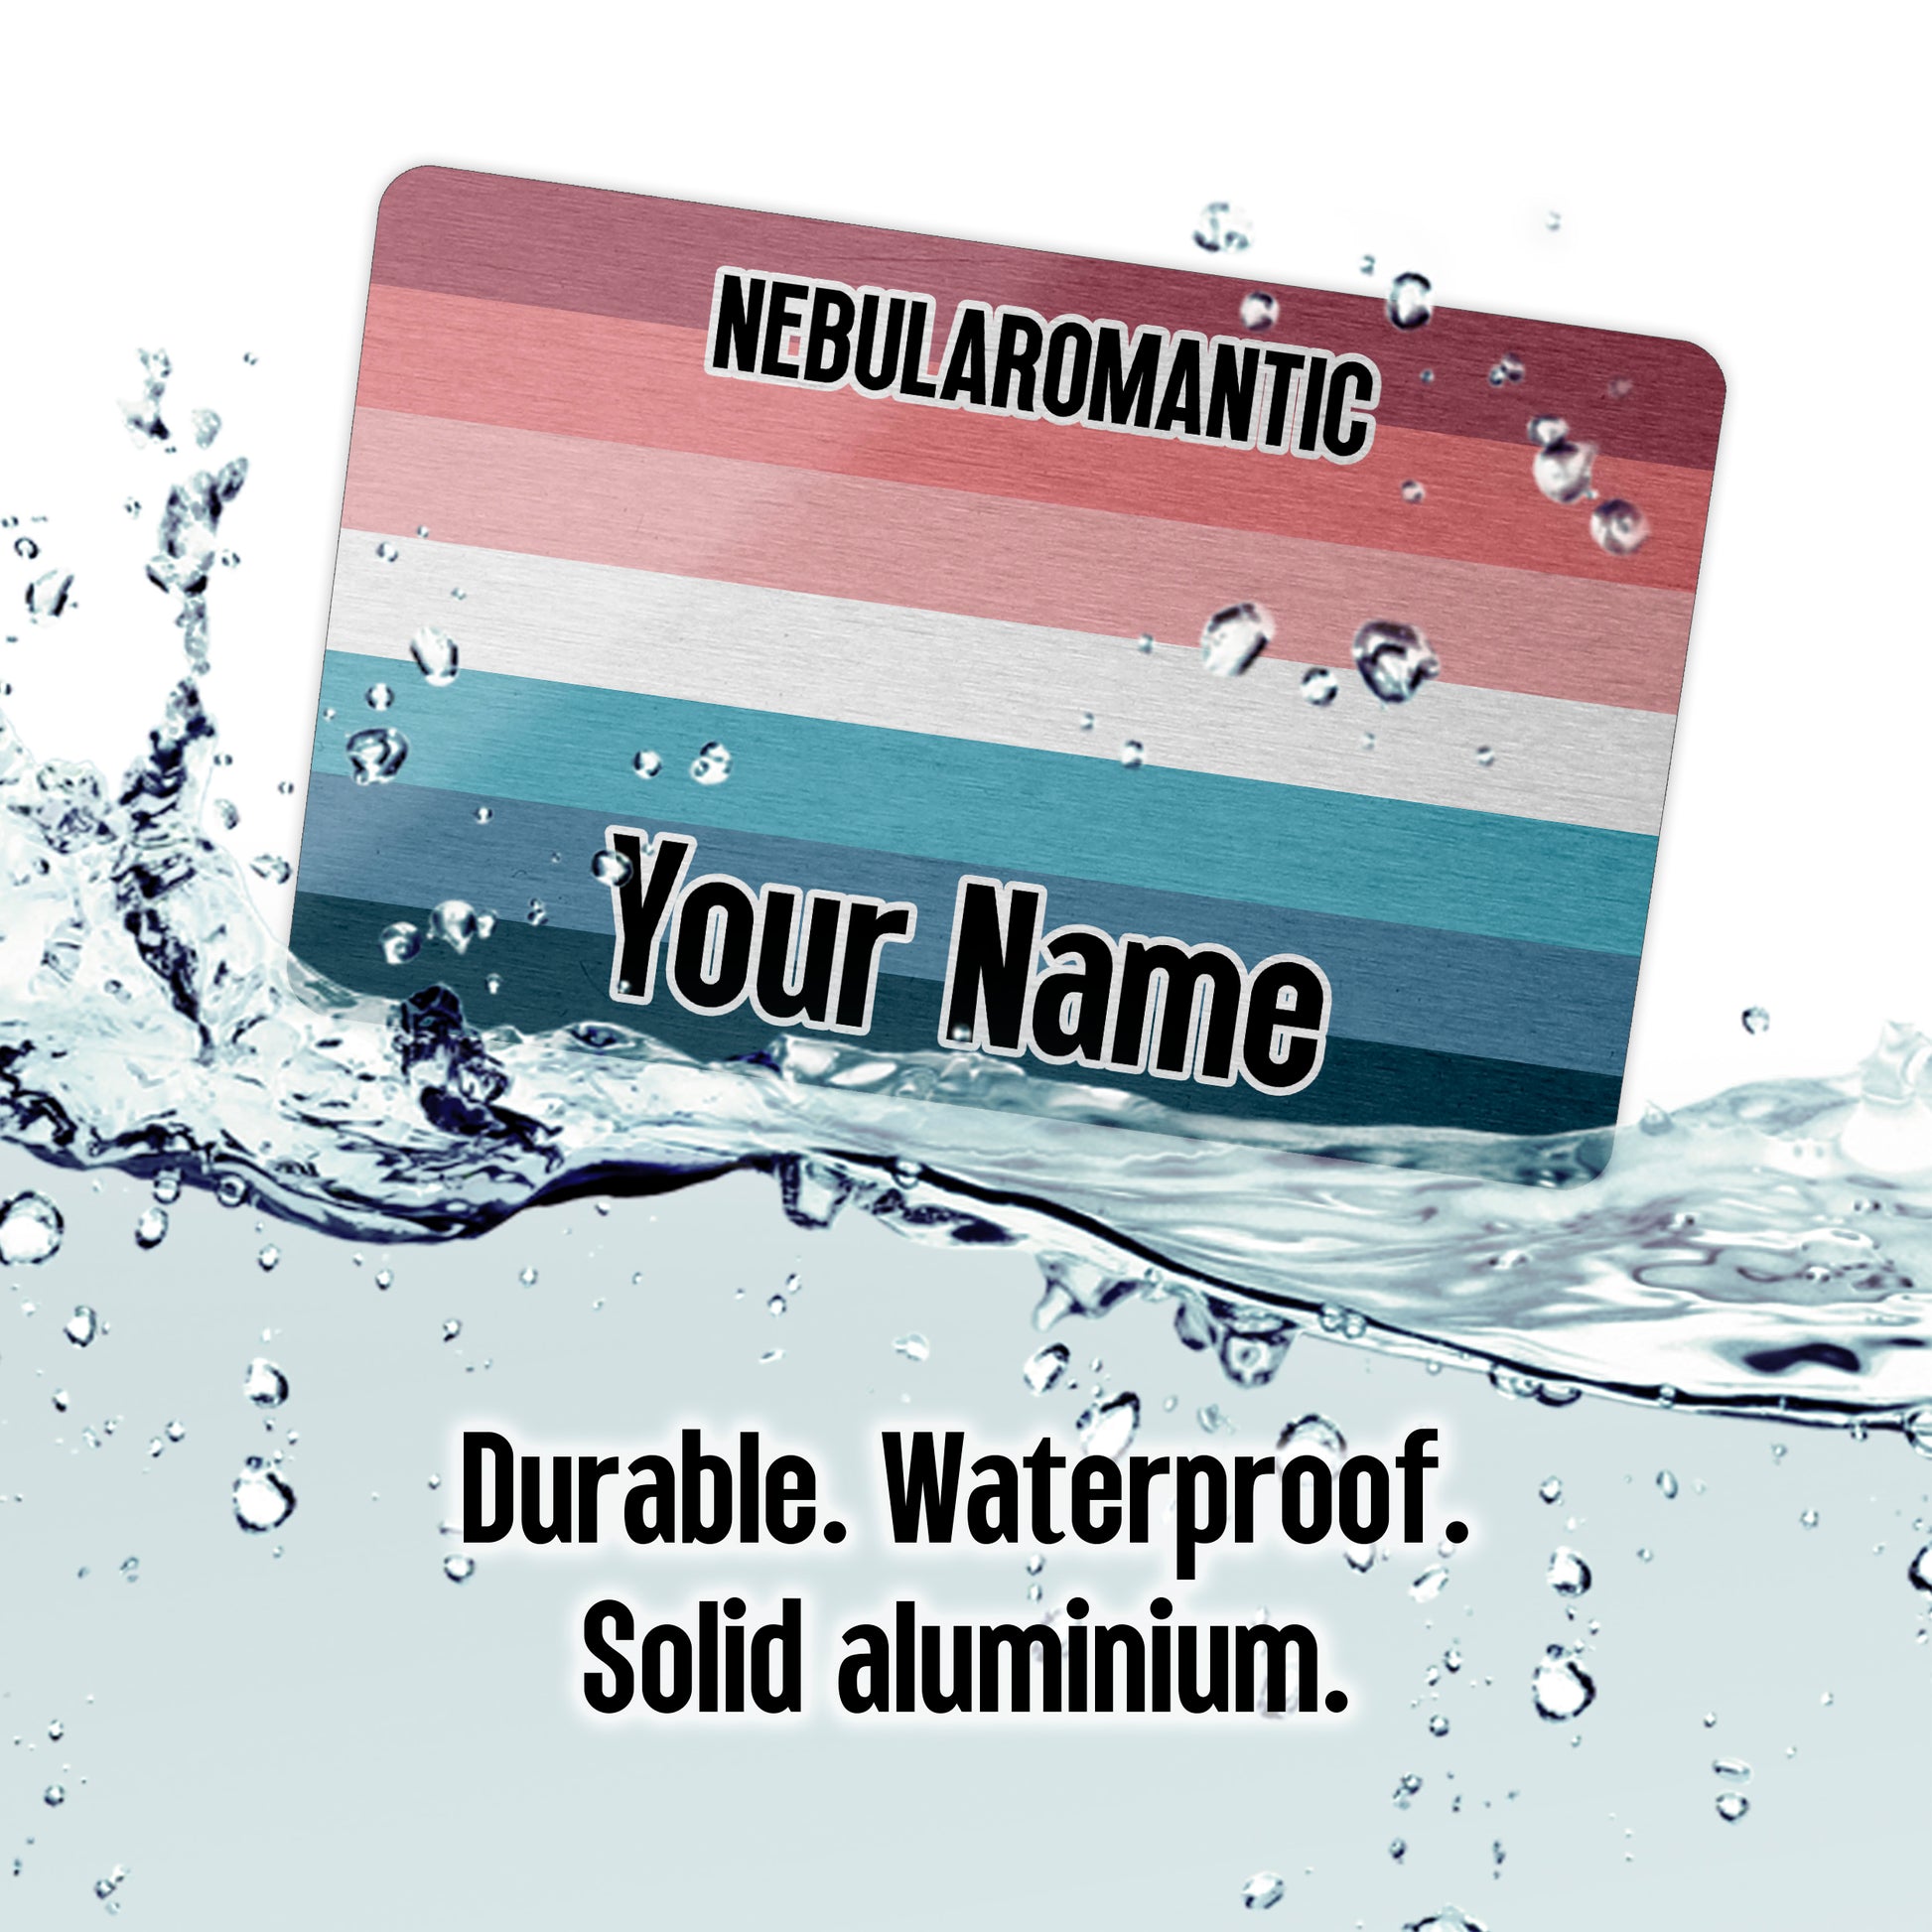 Aluminium wallet card personalised with your name and the nebularomantic flag